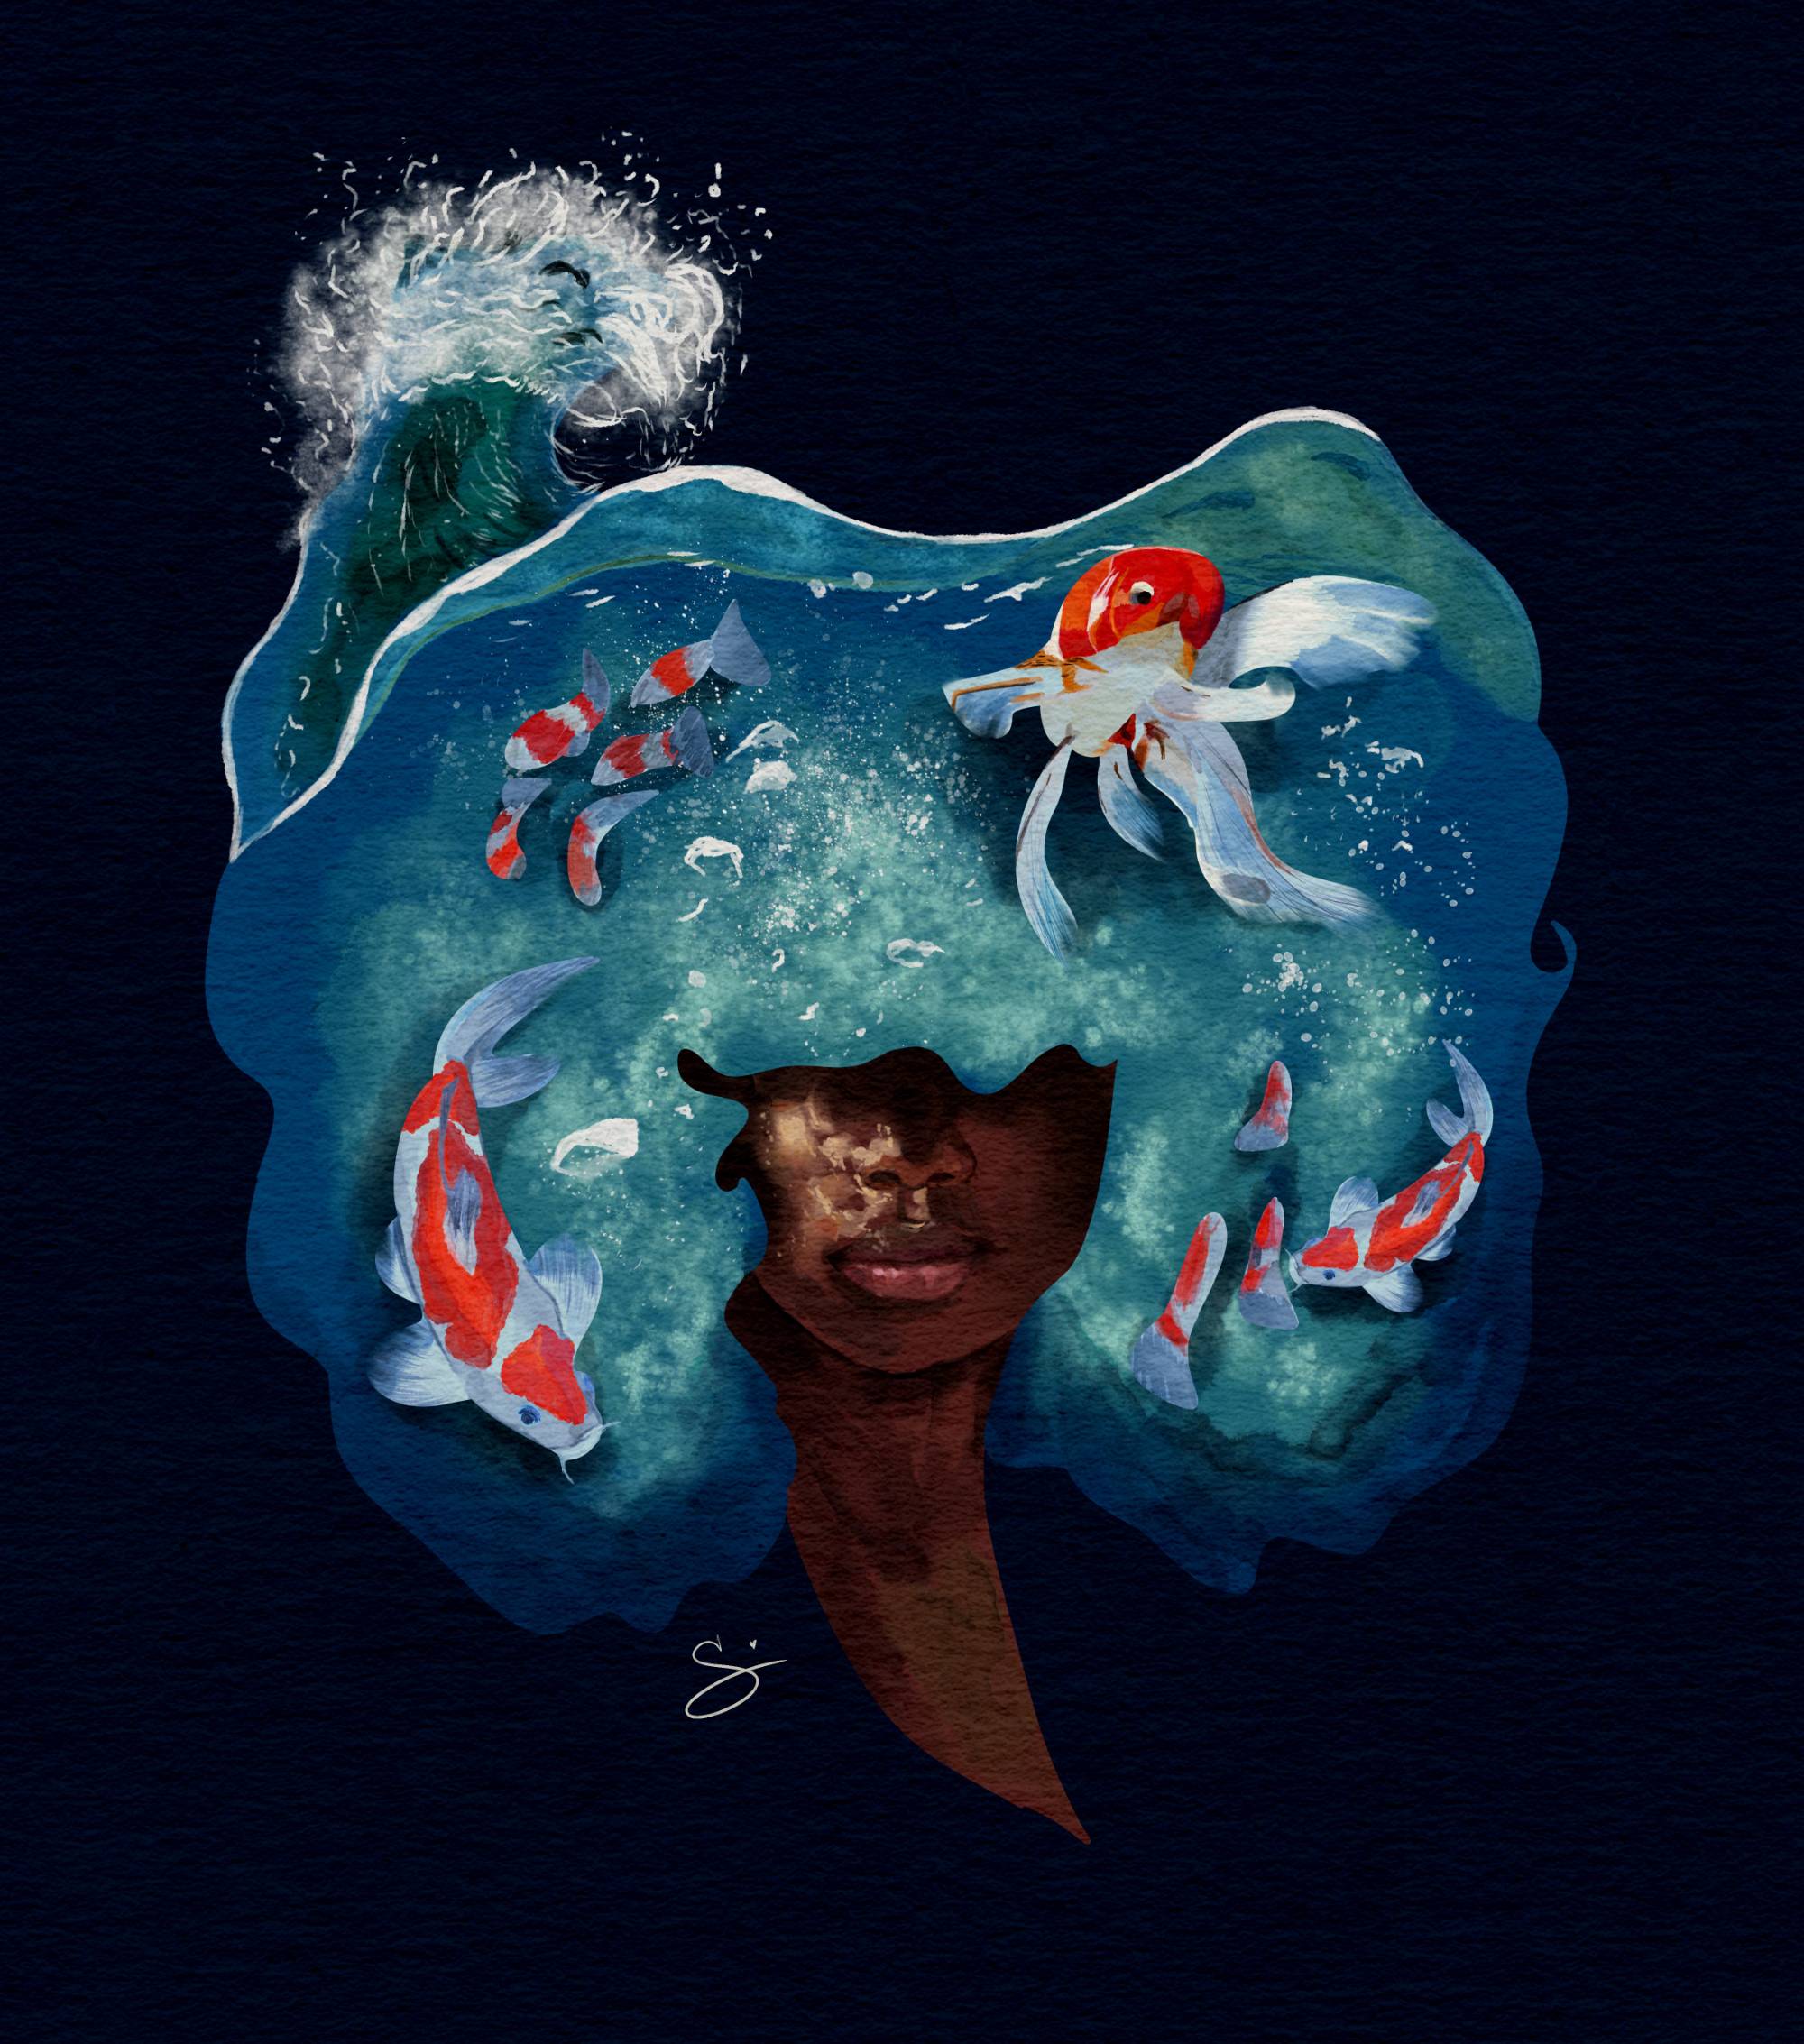 Image of a woman with water superimposed over her head and fish swimming in the water